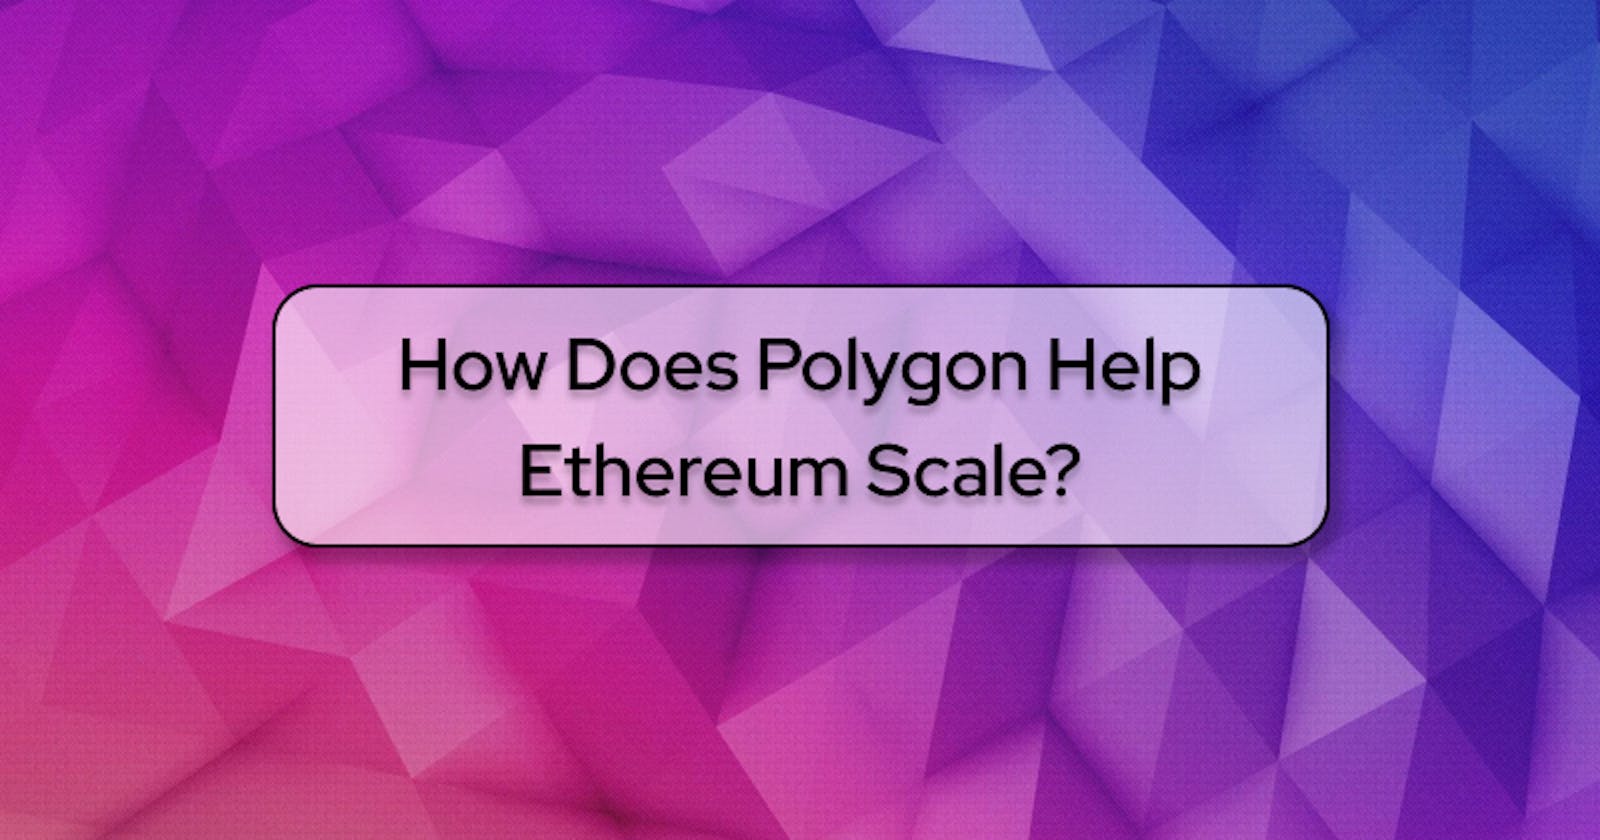 How Does Polygon Help Ethereum Scale?